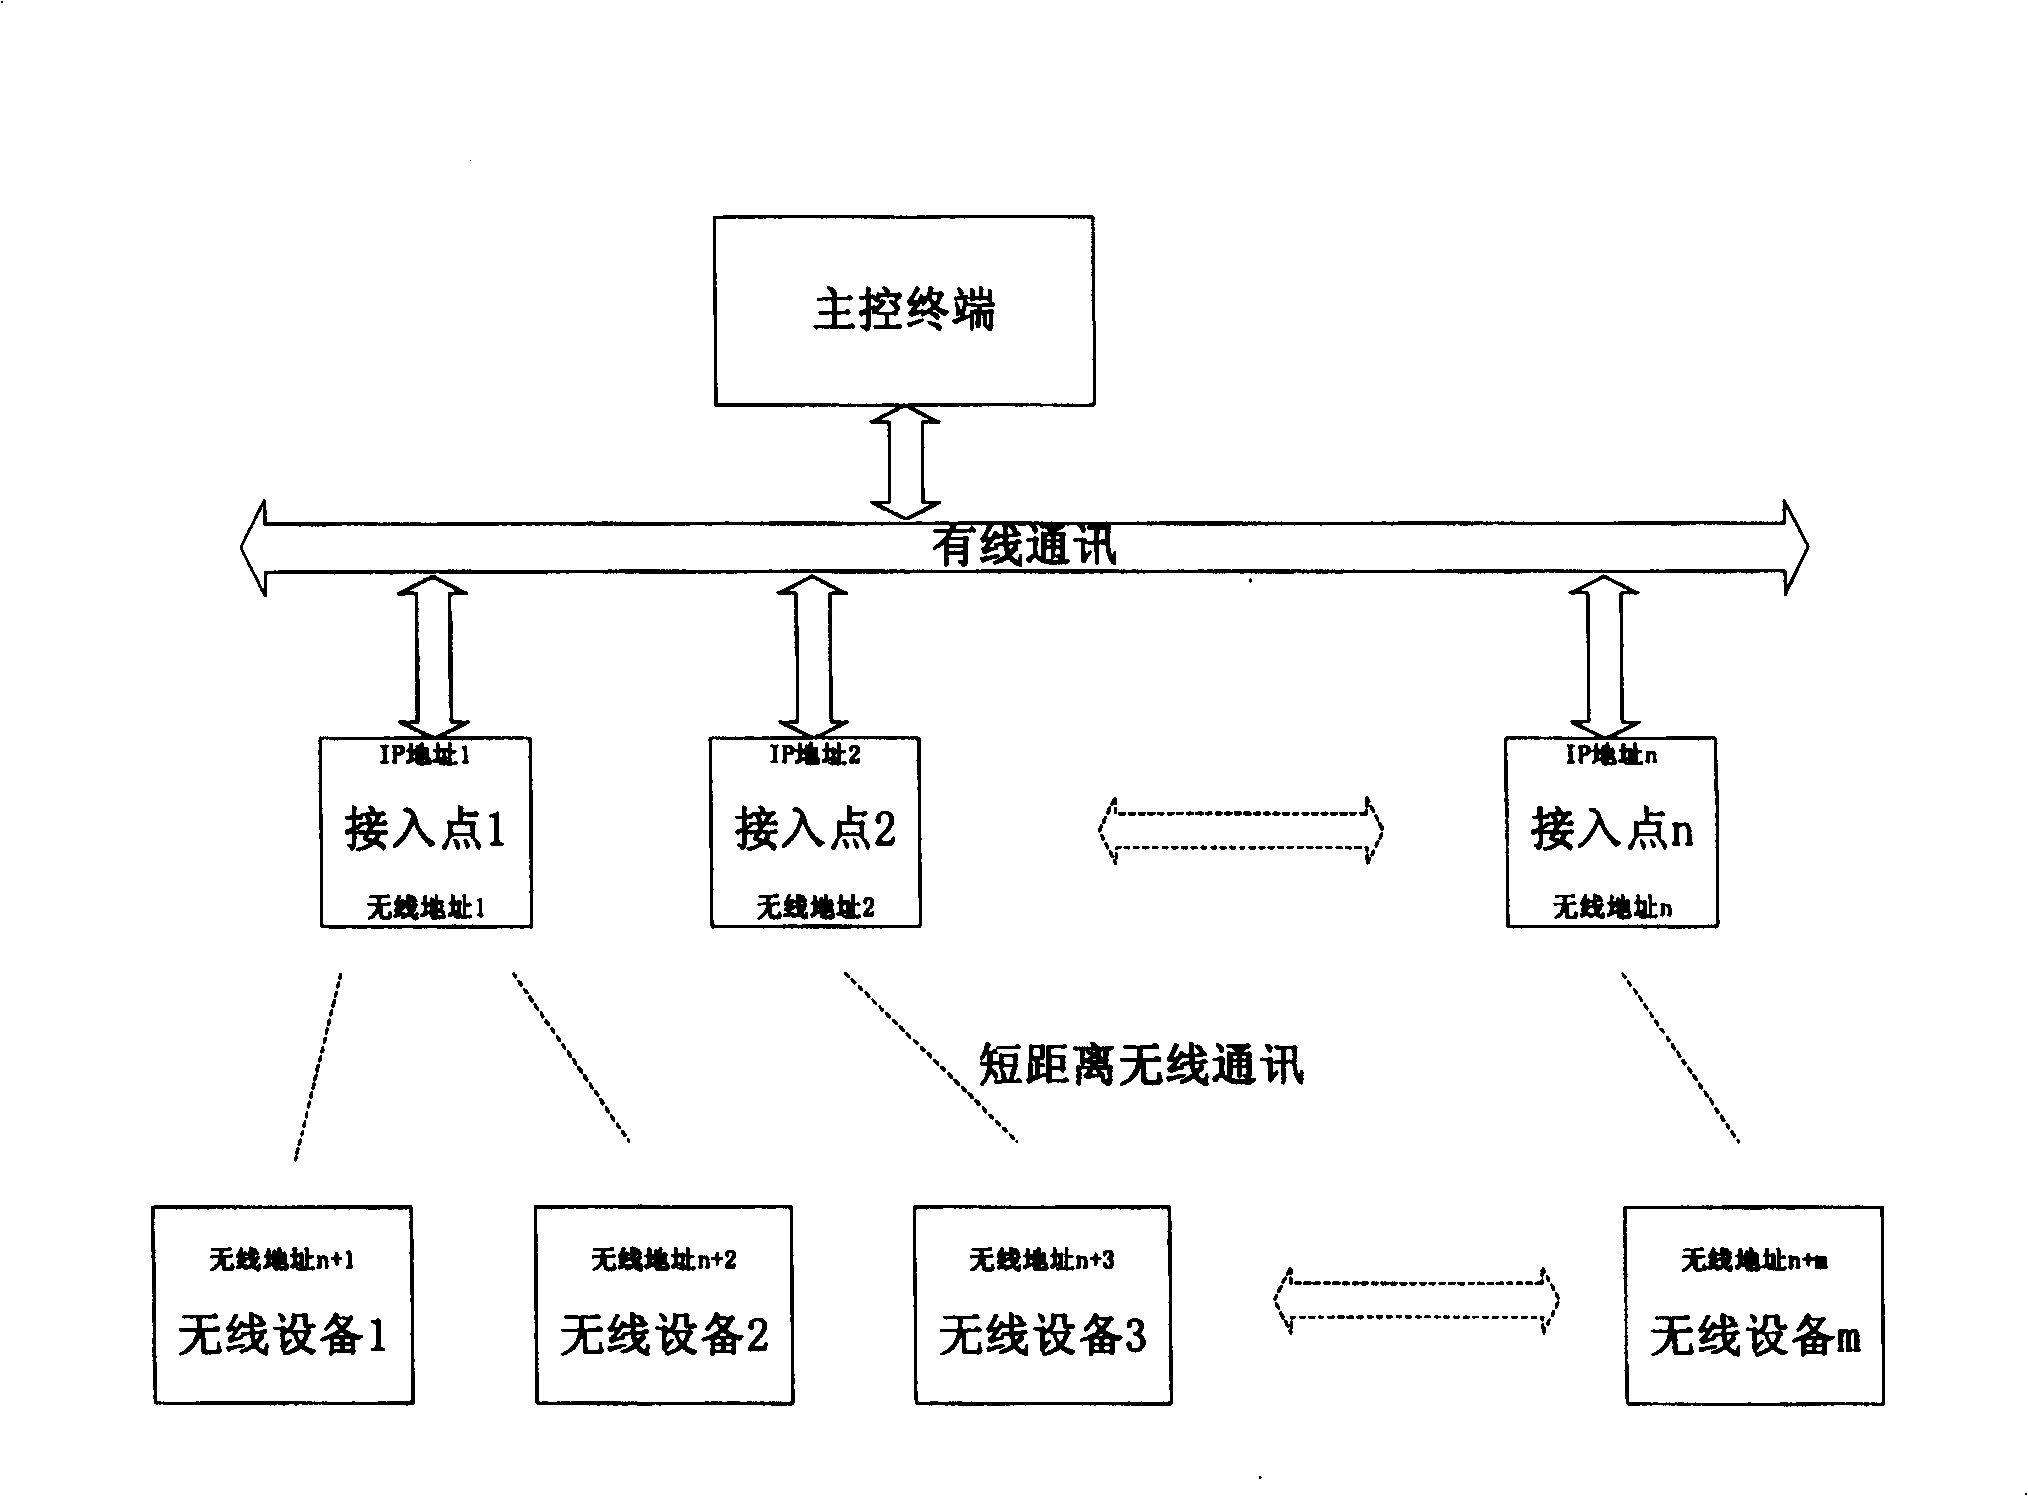 Method of intercommunicating access for short distance wireless communication network and trunk communication network